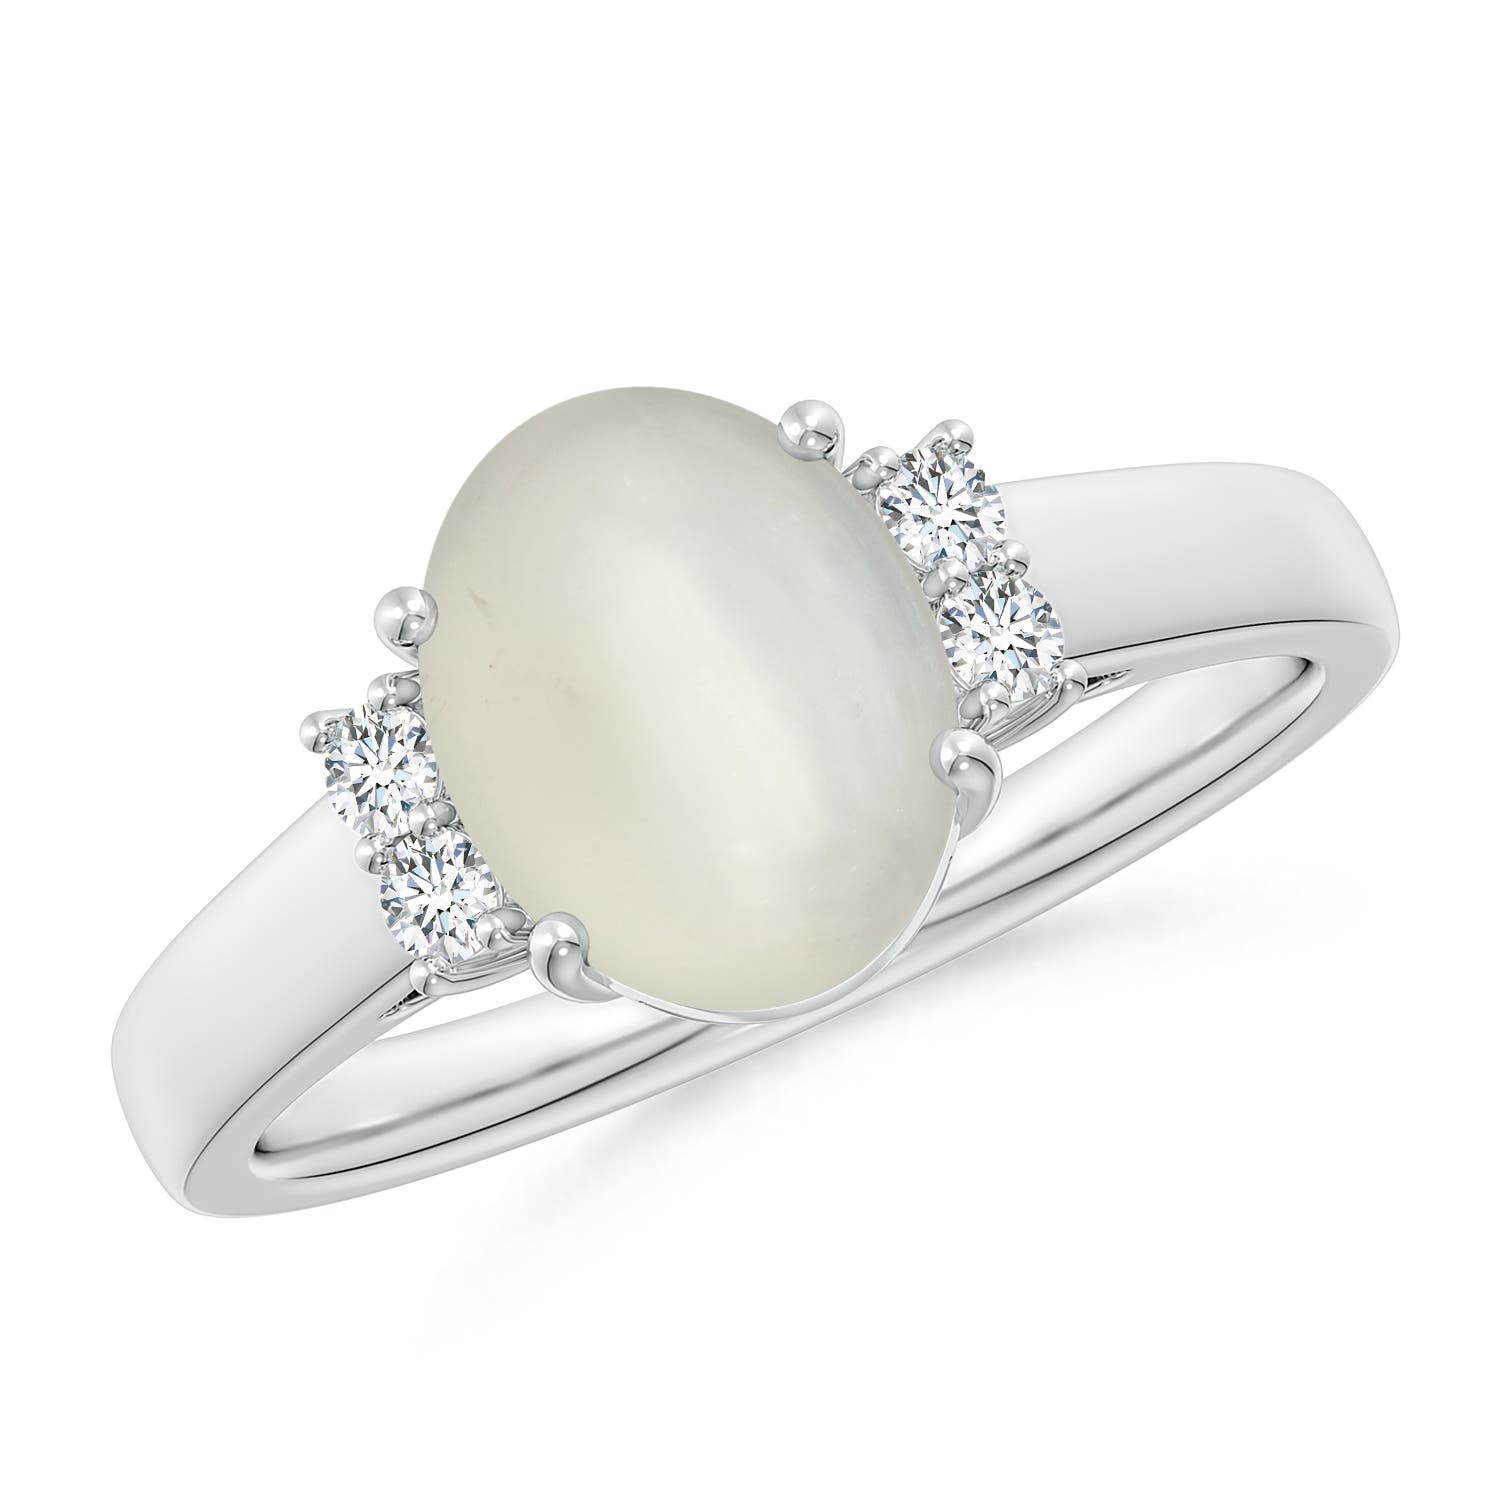 AAA - Moonstone / 1.8 CT / 14 KT White Gold